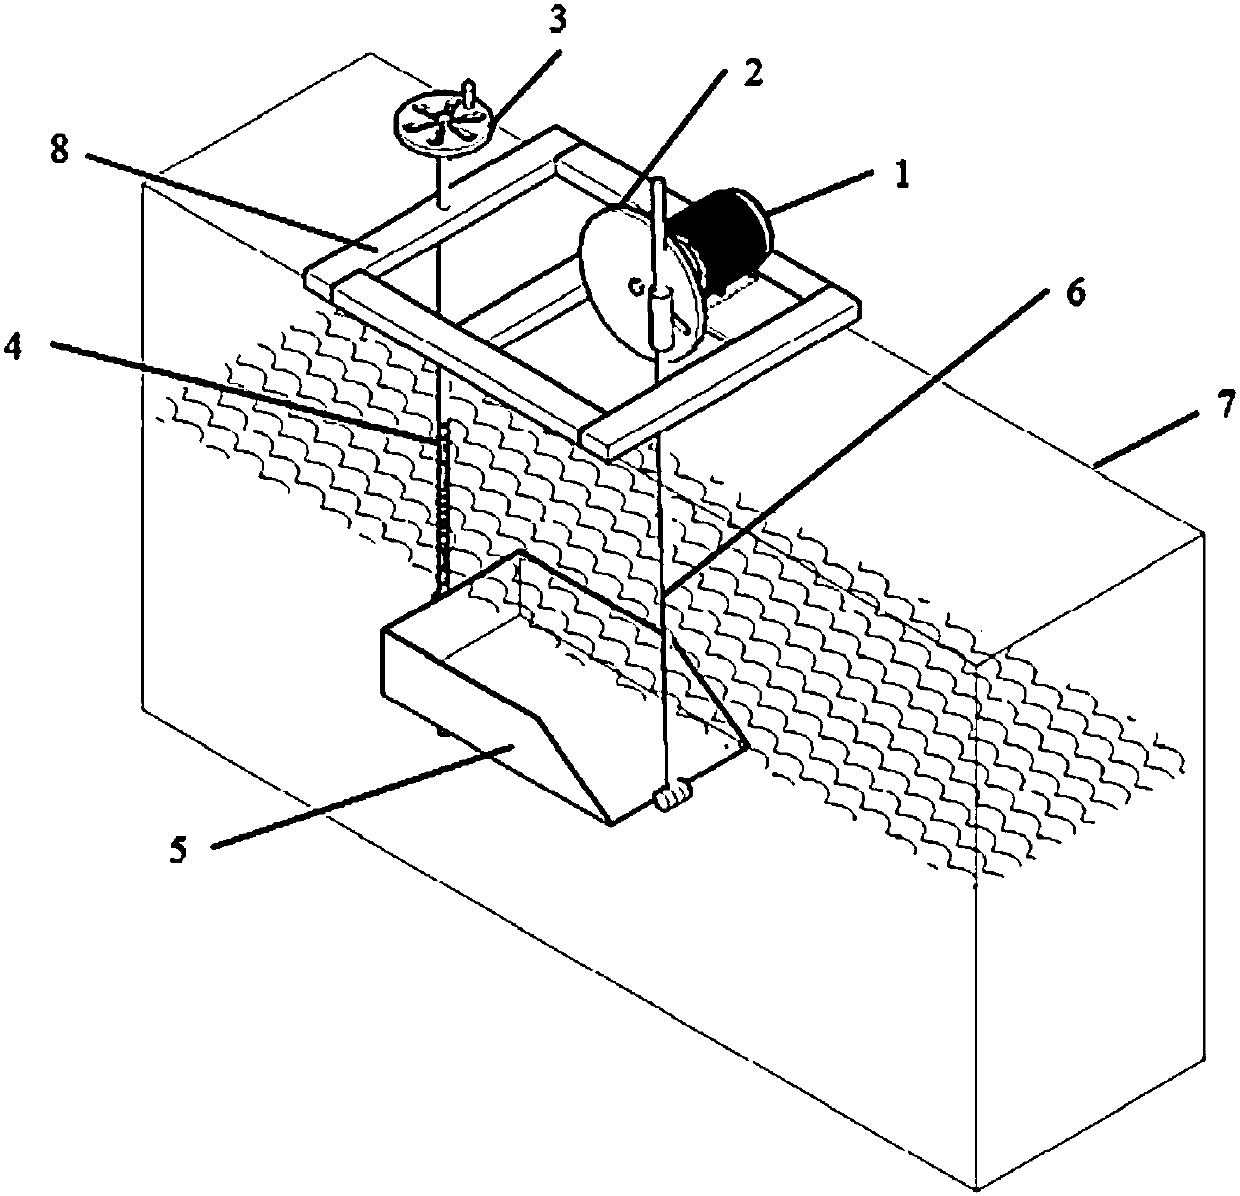 Insertion type breaking wave simulation device